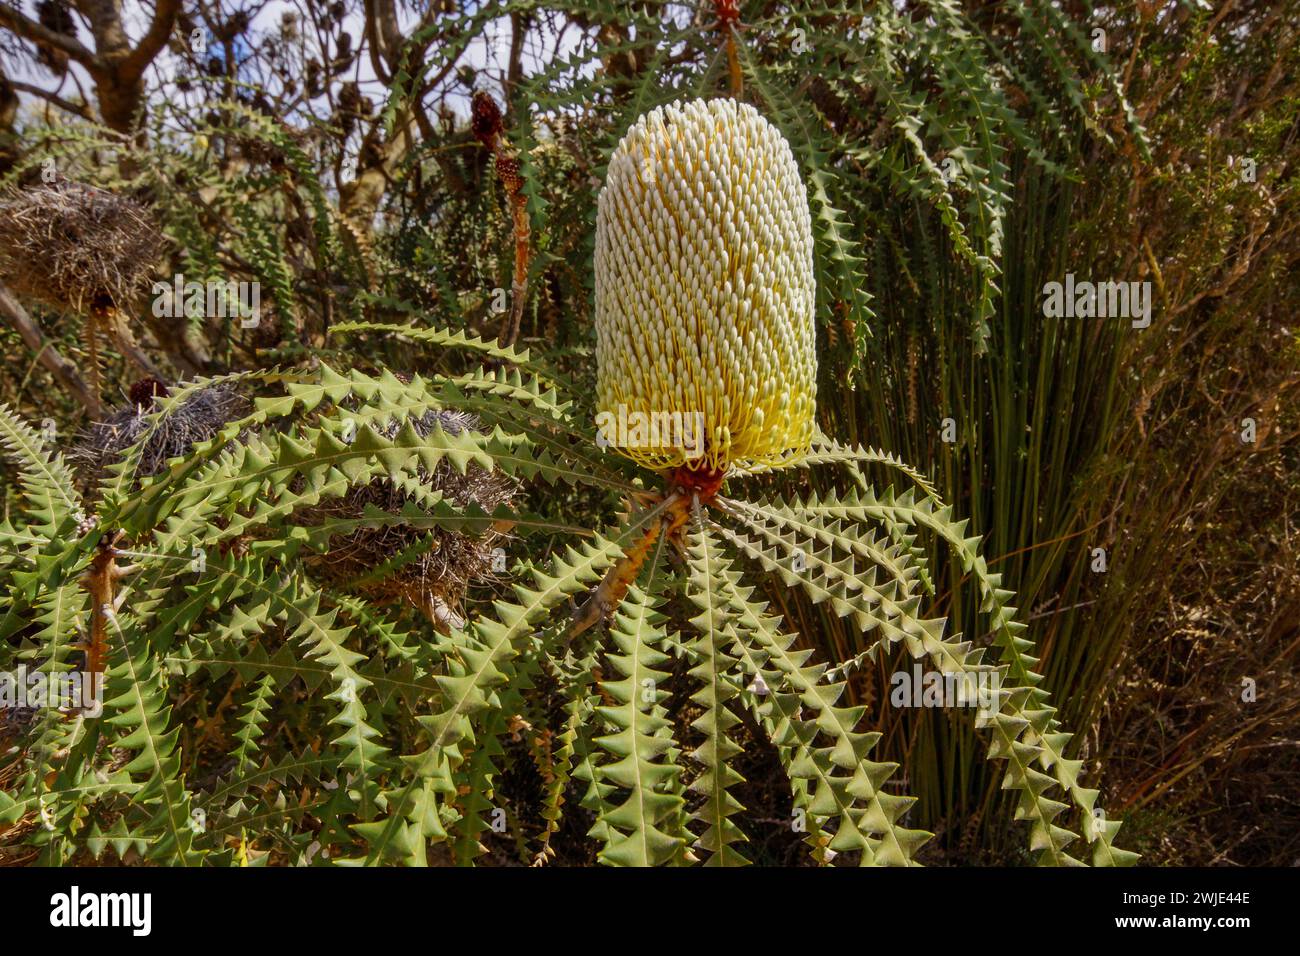 Flower spike of the showy banksia (Banksia speciosa) with saw-toothed leaves in natural habitat, Western Australia Stock Photo